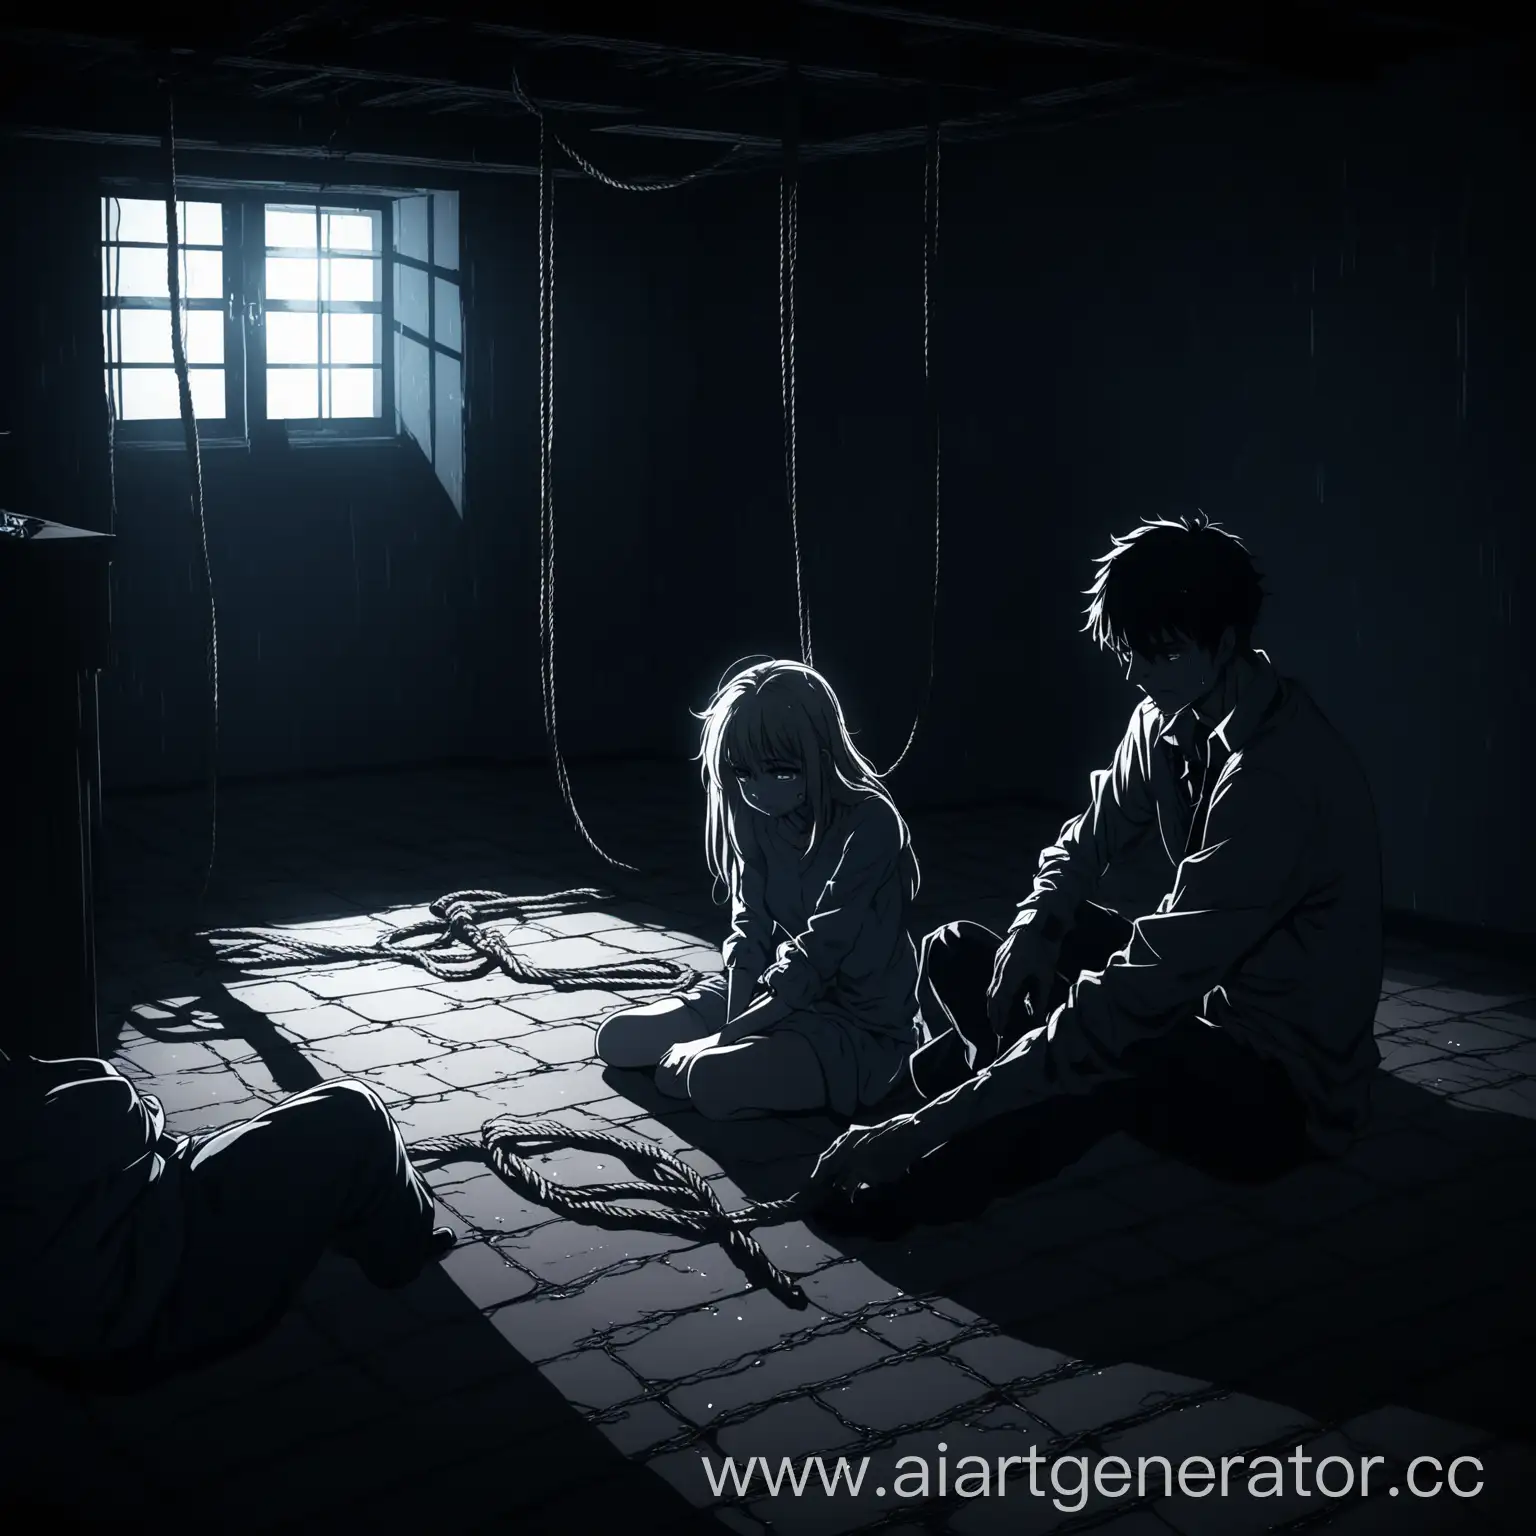 Emotional-Girlfriend-Tied-in-Basement-Contrast-of-Light-and-Shadow-in-Anime-Style